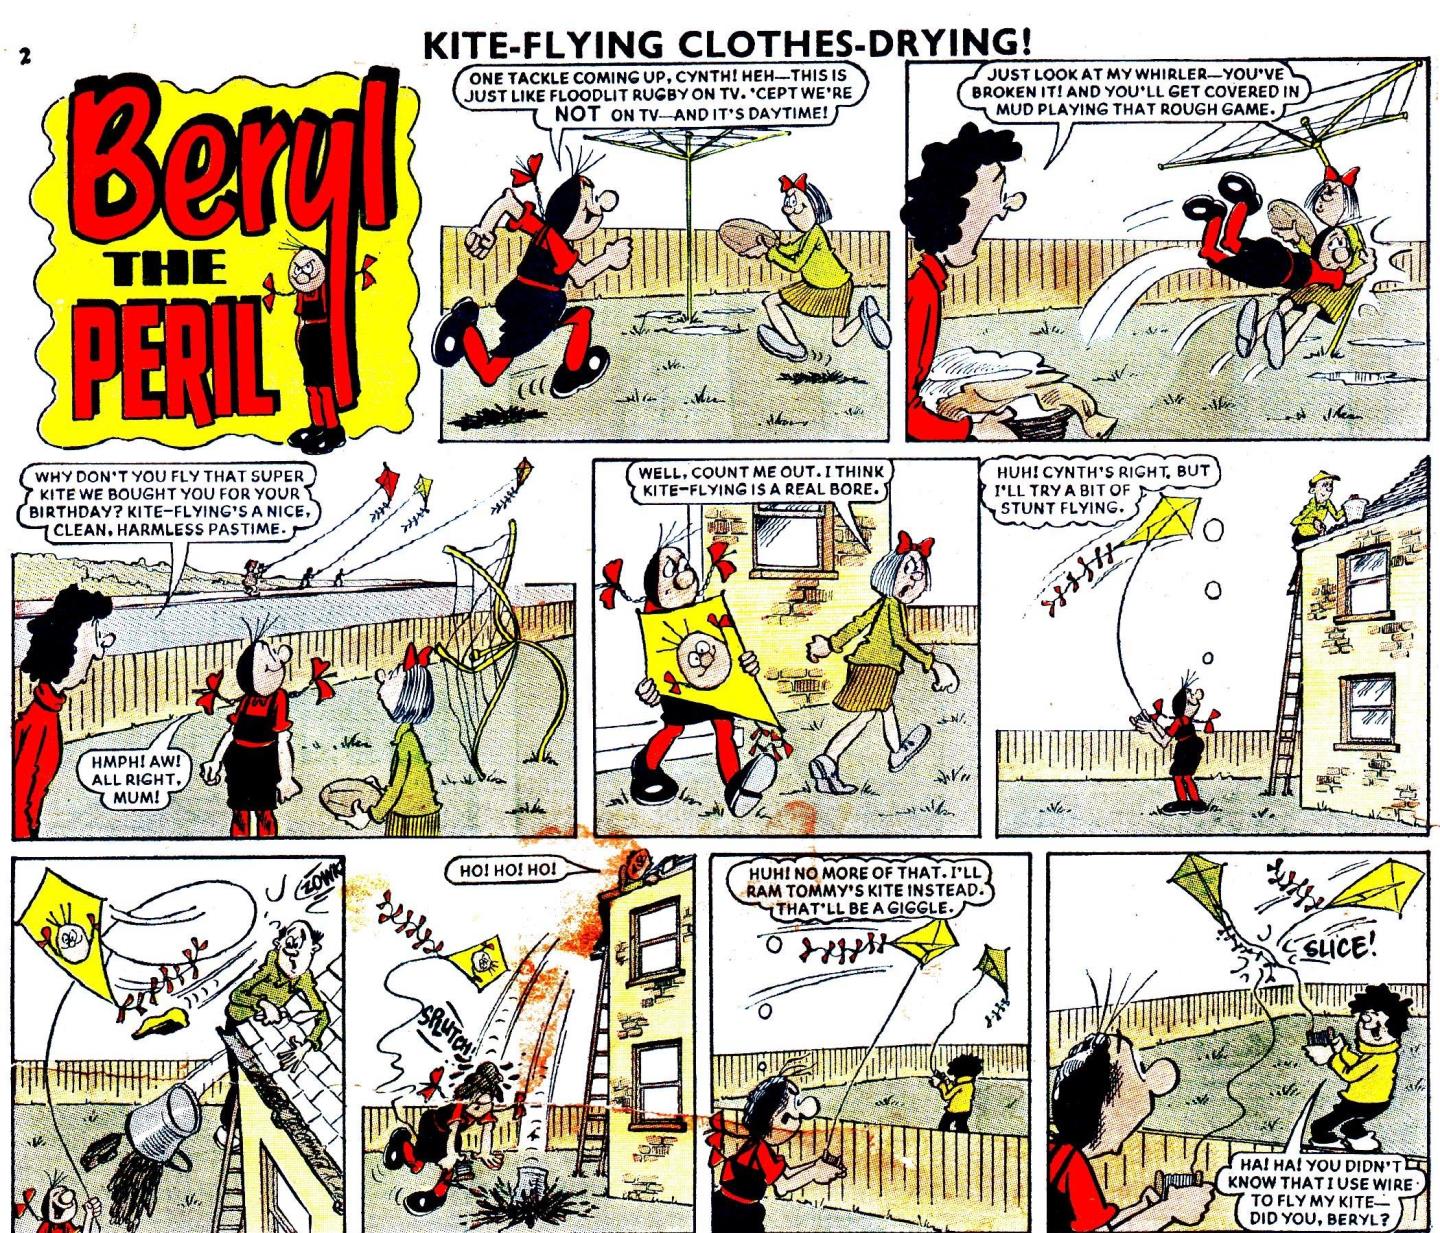 Beryl the Peril by John F Dallas, 1977, who worked on Beano and Topper as well as many other comics. 